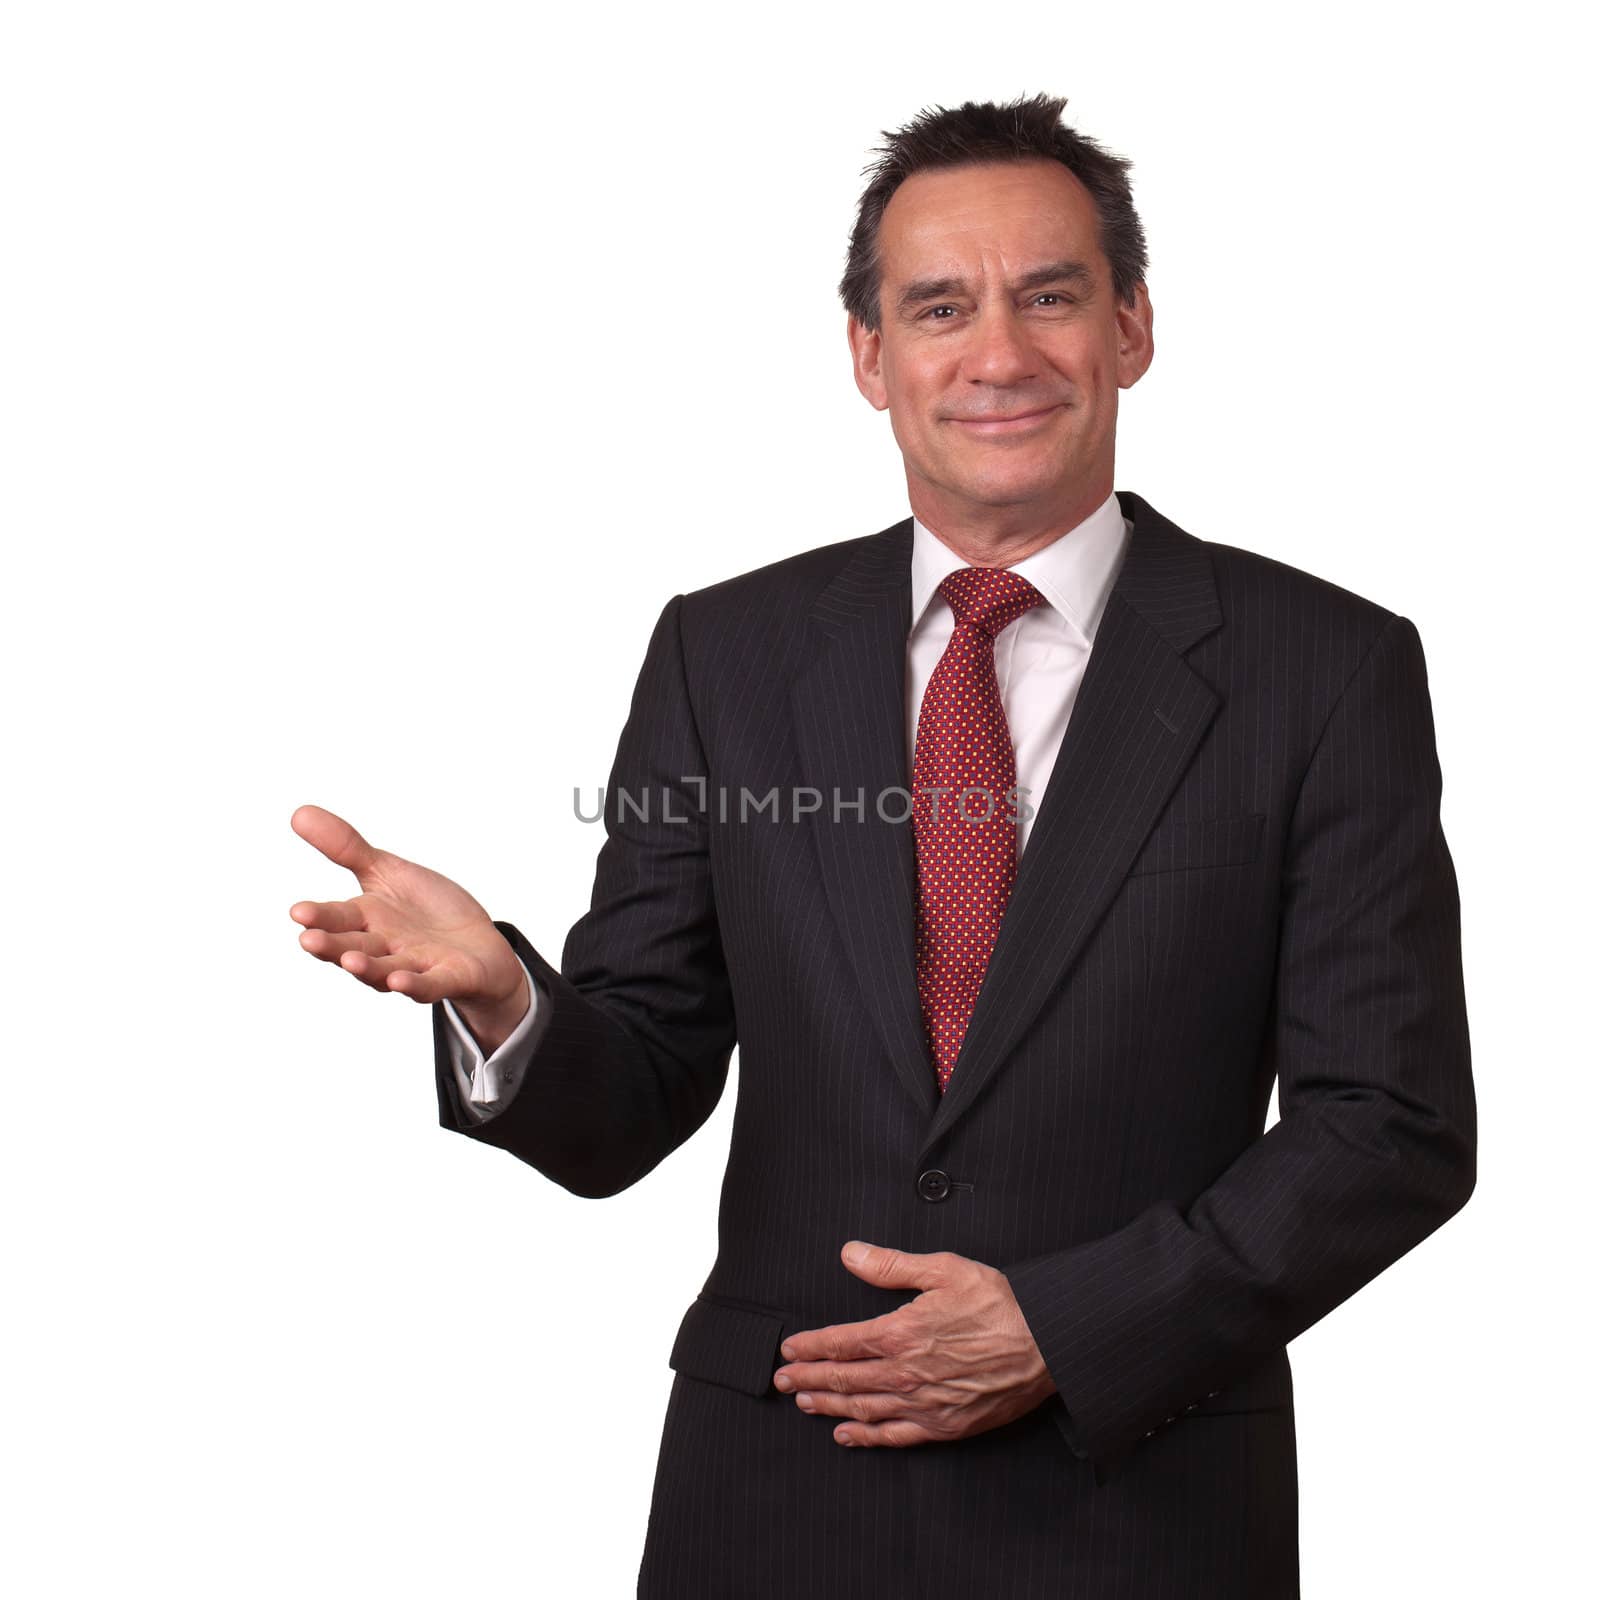 Attractive Smiling Middle Age Business Man in Suit Gesturing Welcome Isolated